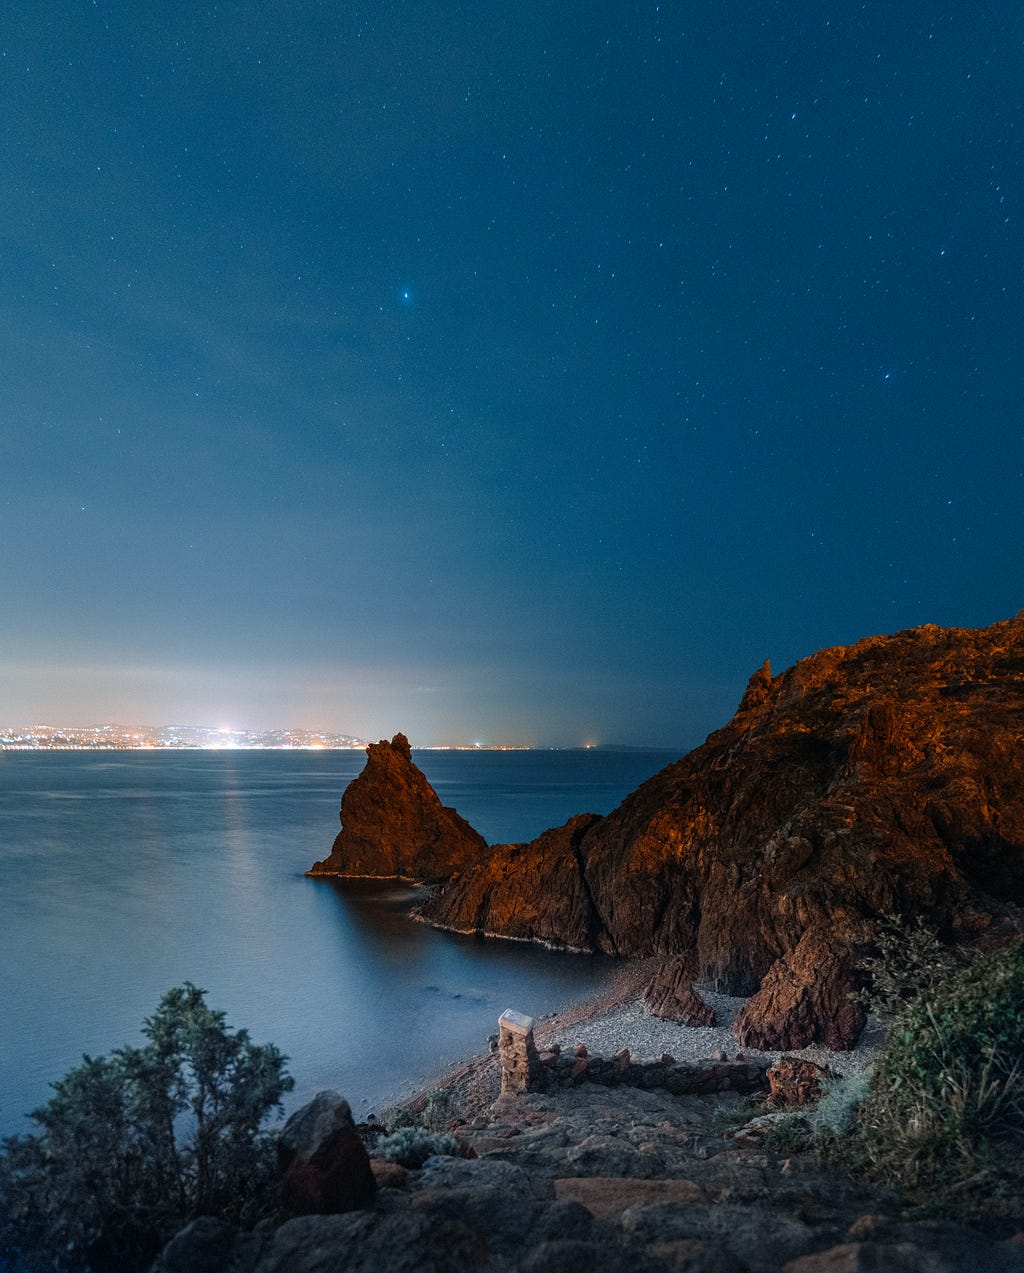 This is a picture of the sea and sky at night. The water and sky are both dark blue. We can also see stars in the sky. There is also a rock above the sea. Stonerock is dark brown.